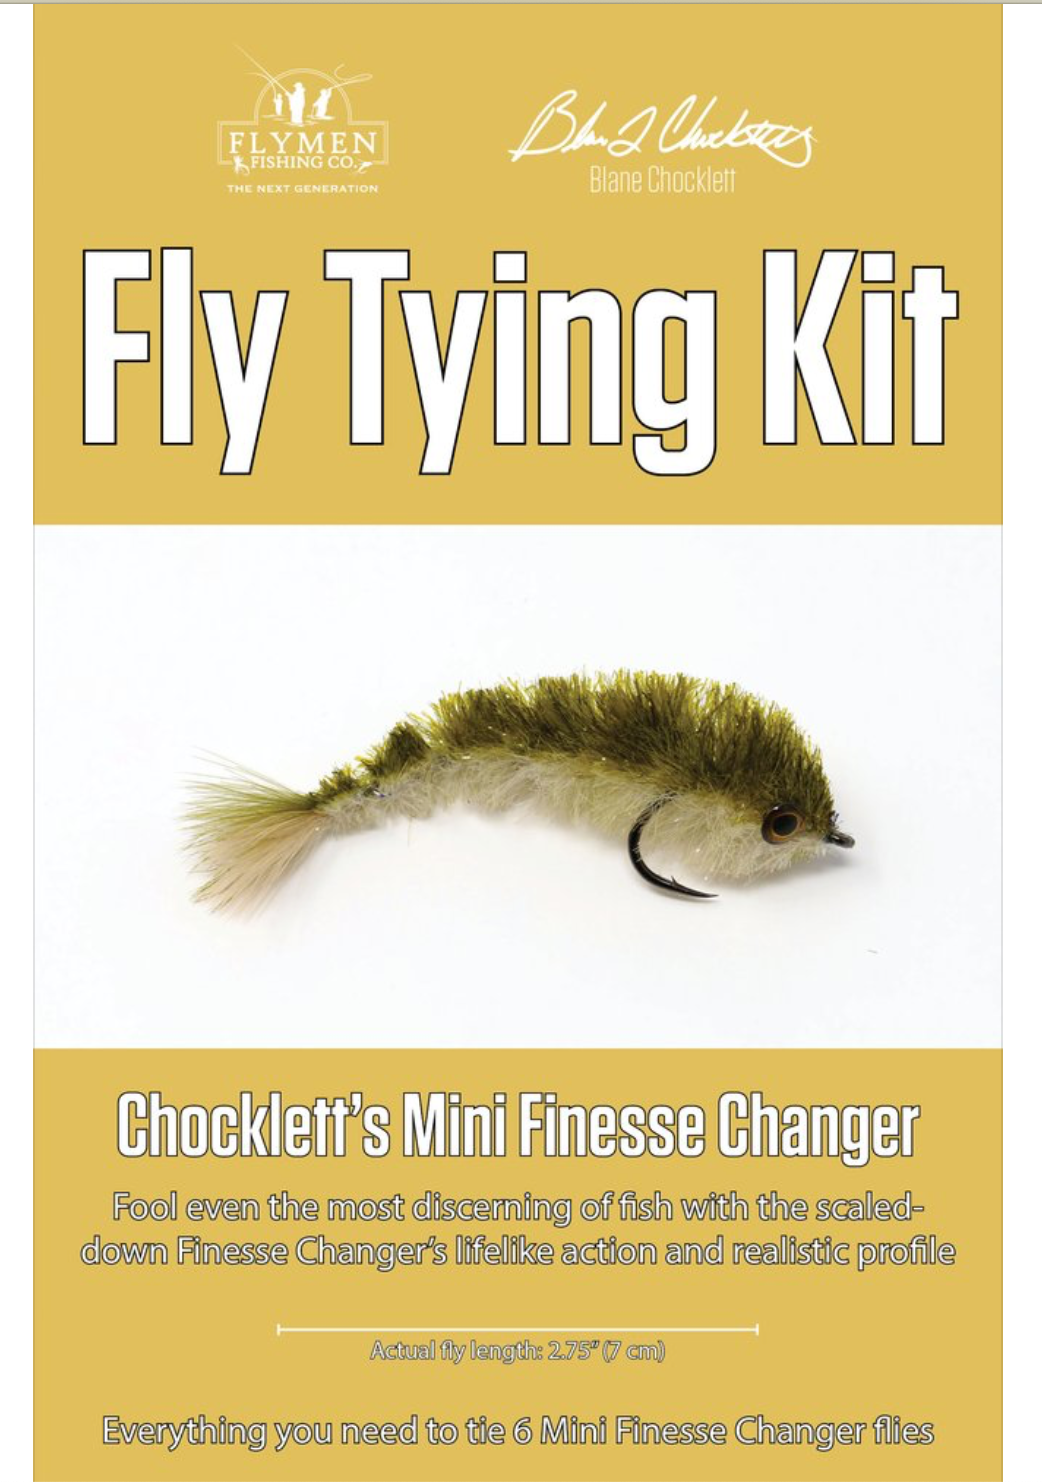 Chocklett's Mini Finesse Changer - Fly Tying Kit - FlyMenFishing Company